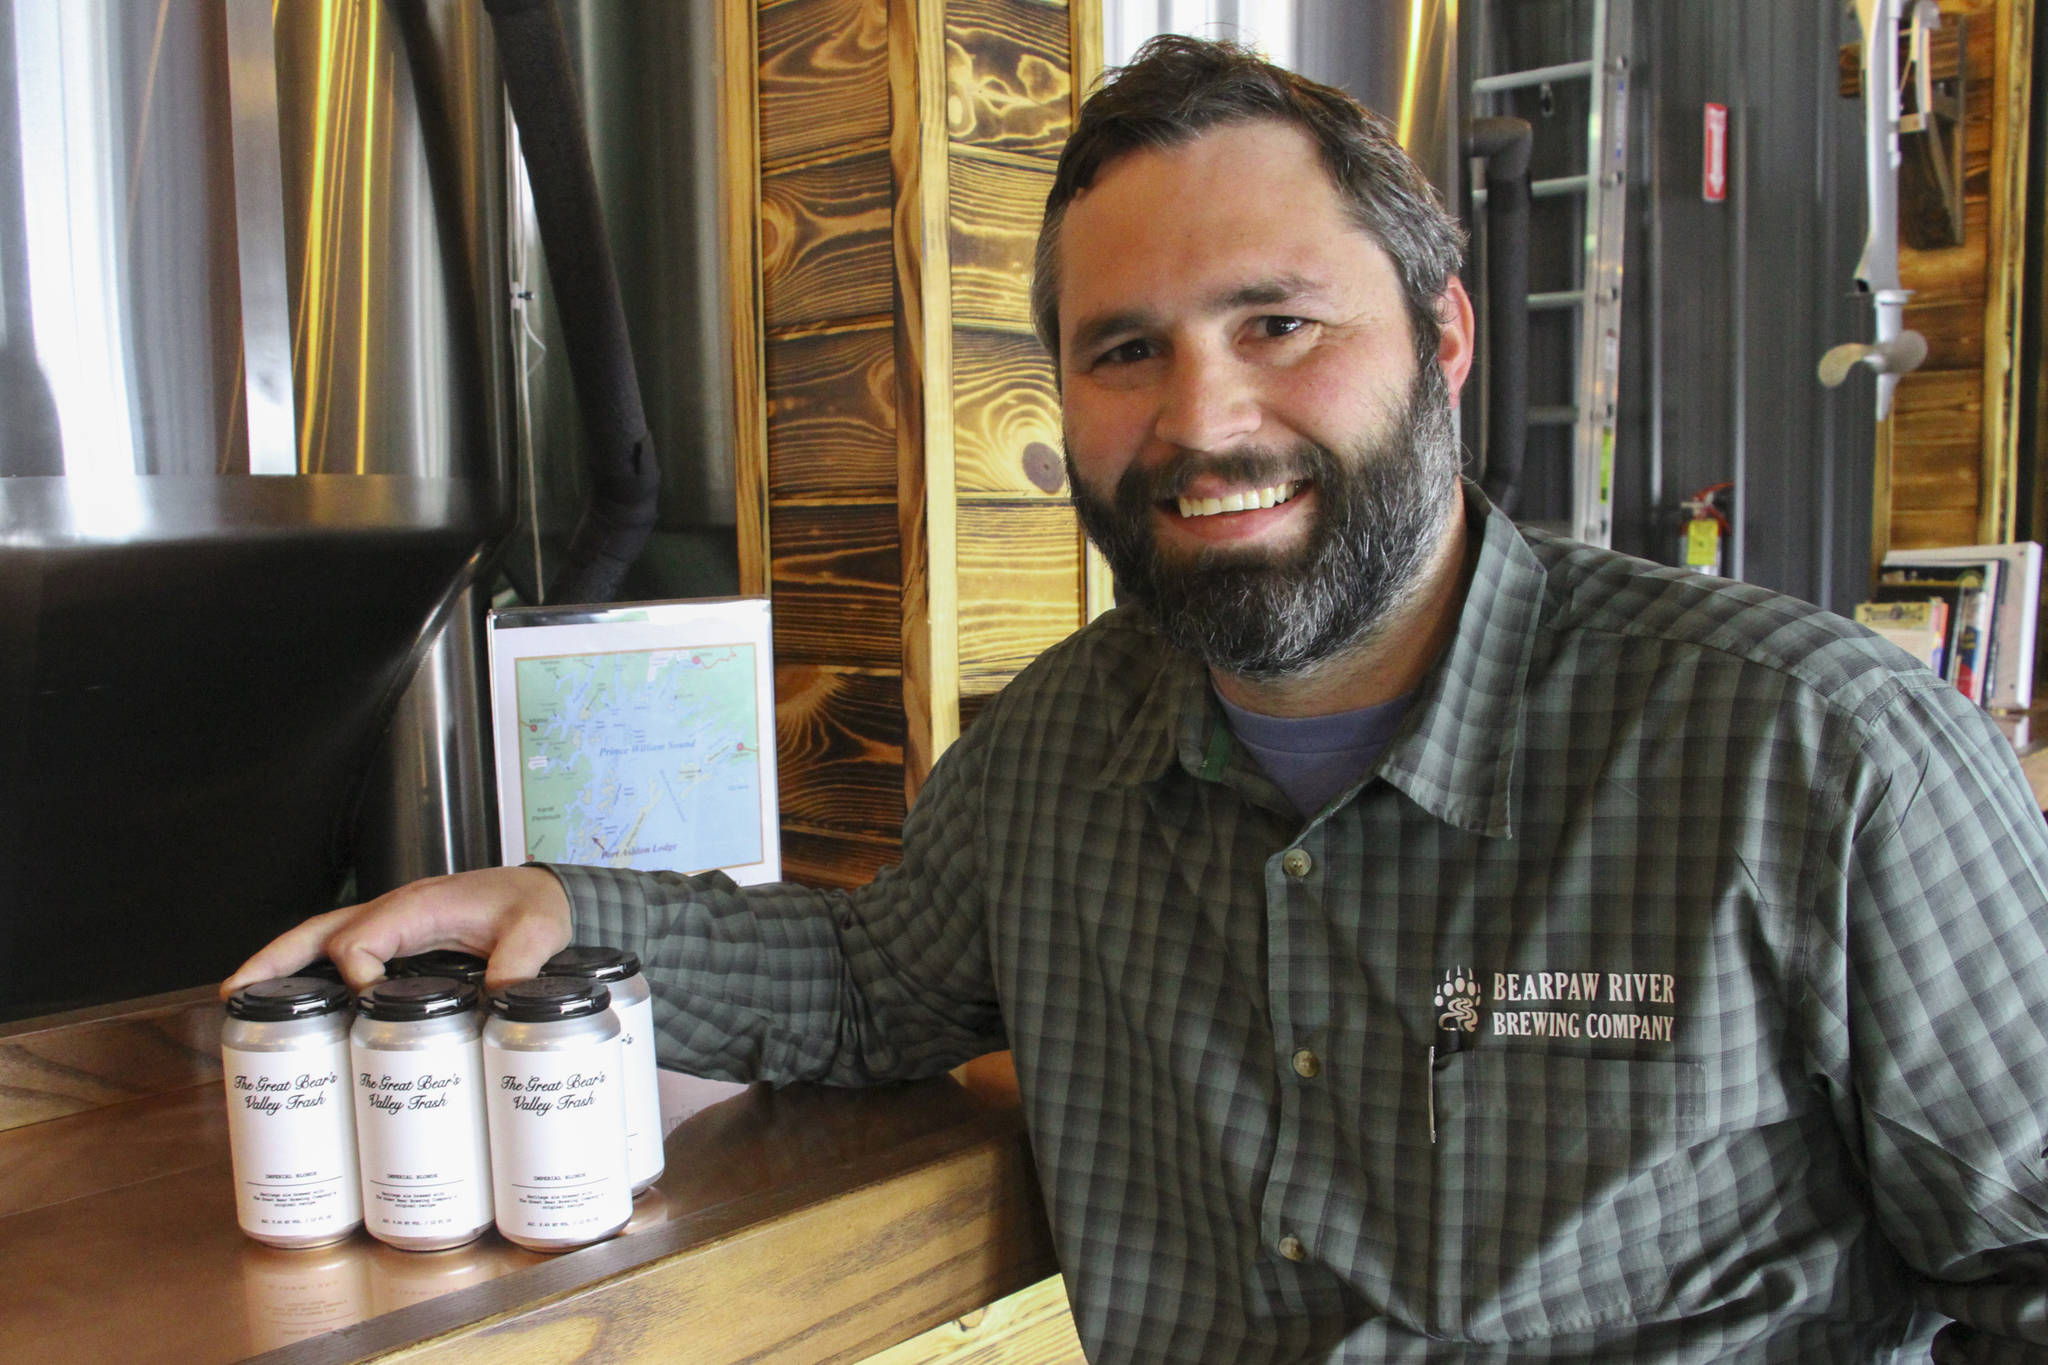 This June 14, 2019, photo shows Jake Wade, the owner and operator of Bearpaw River Brewing Co., posing for a photo in his craft brewery in Wasilla, Alaska. The brewery has begun making the Valley Trash ale, using the original recipe from another brewery that went out of business. The name of the beer harkens back to a slur cast on residents of the Matanuska-Susitna Borough by former state Sen. Ben Stevens, an Anchorage Republican who now serves as an aide to Alaska Gov. Mike Dunleavy. (AP Photo/Mark Thiessen)